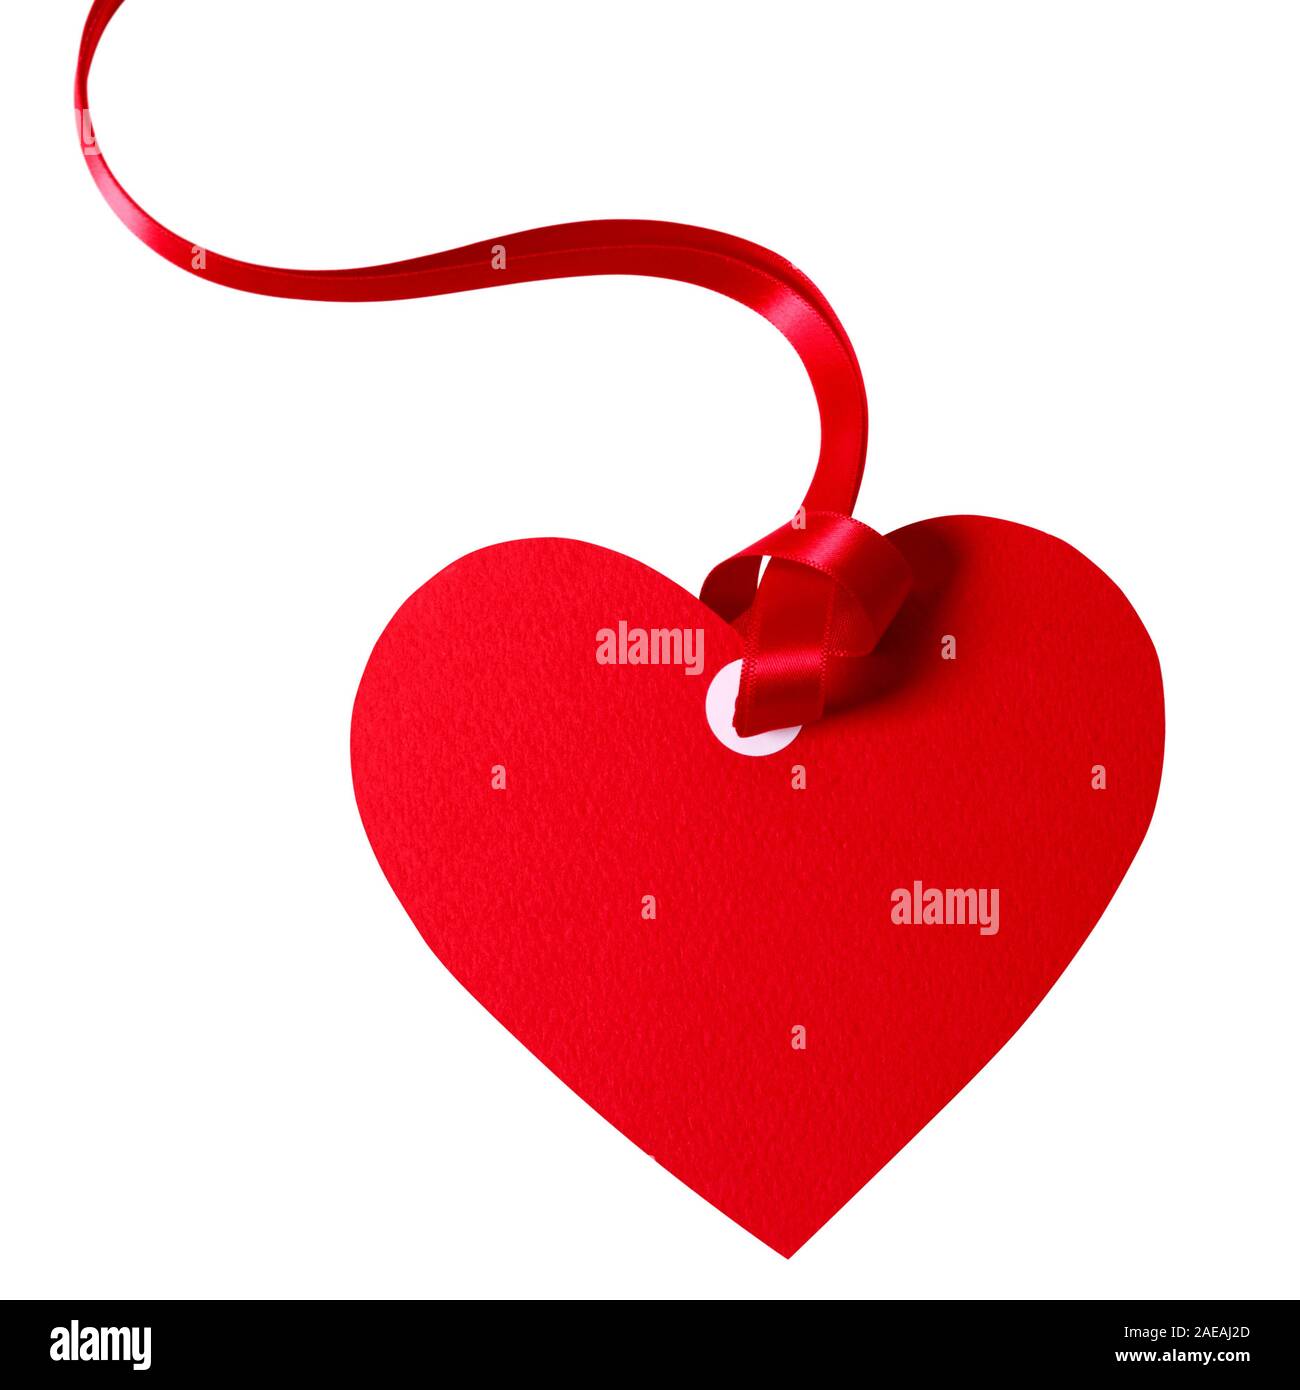 Valentine card or heart shaped gift tag with red ribbon isolated on a white background. Stock Photo